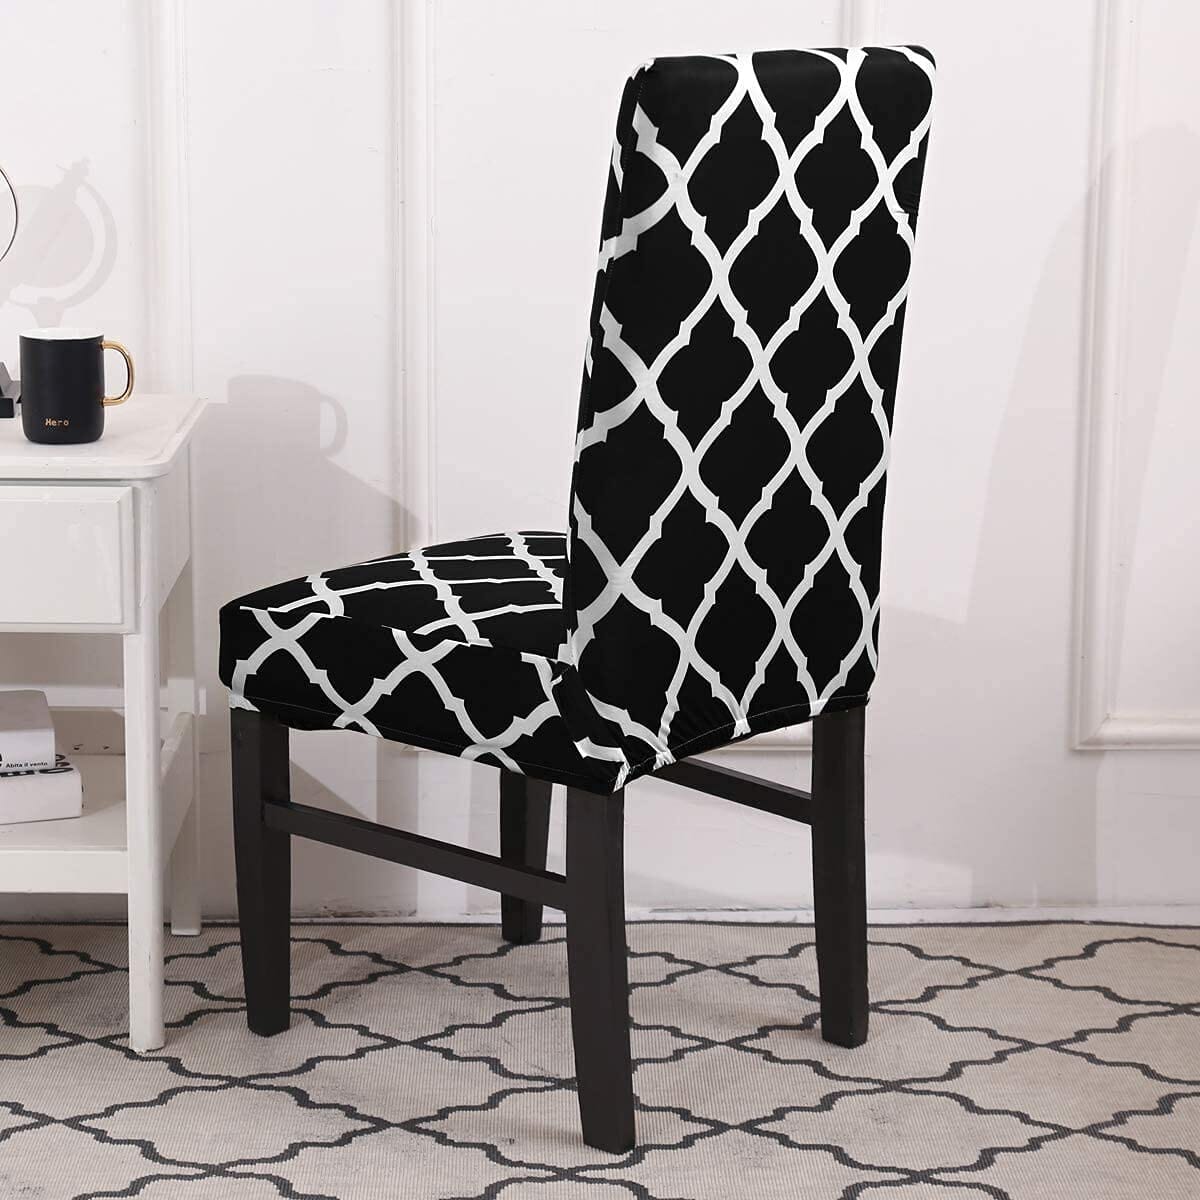 Black Diamond Premium Chair Cover - Stretchable & Elastic Fitted Great Happy IN 2 PCS - ₹799 